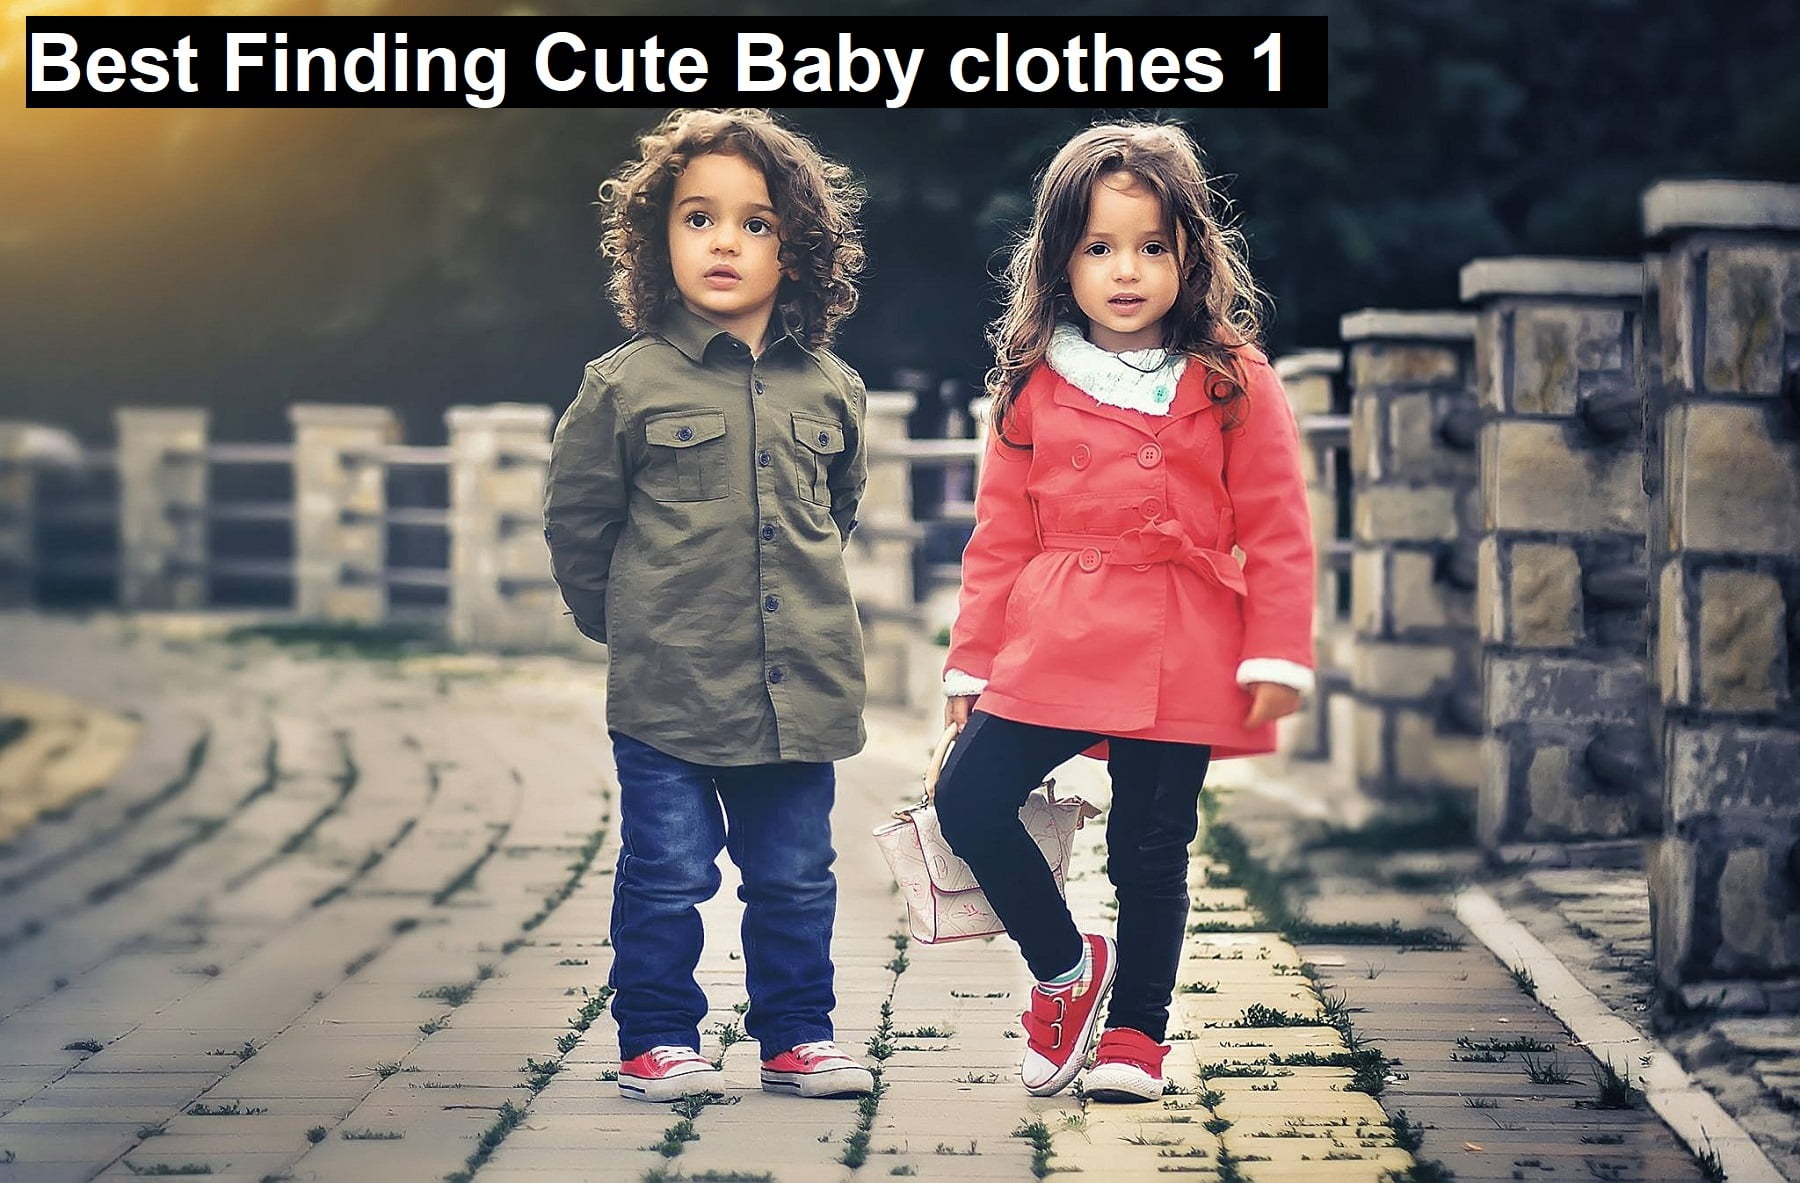 Best Finding Cute Baby clothes 1